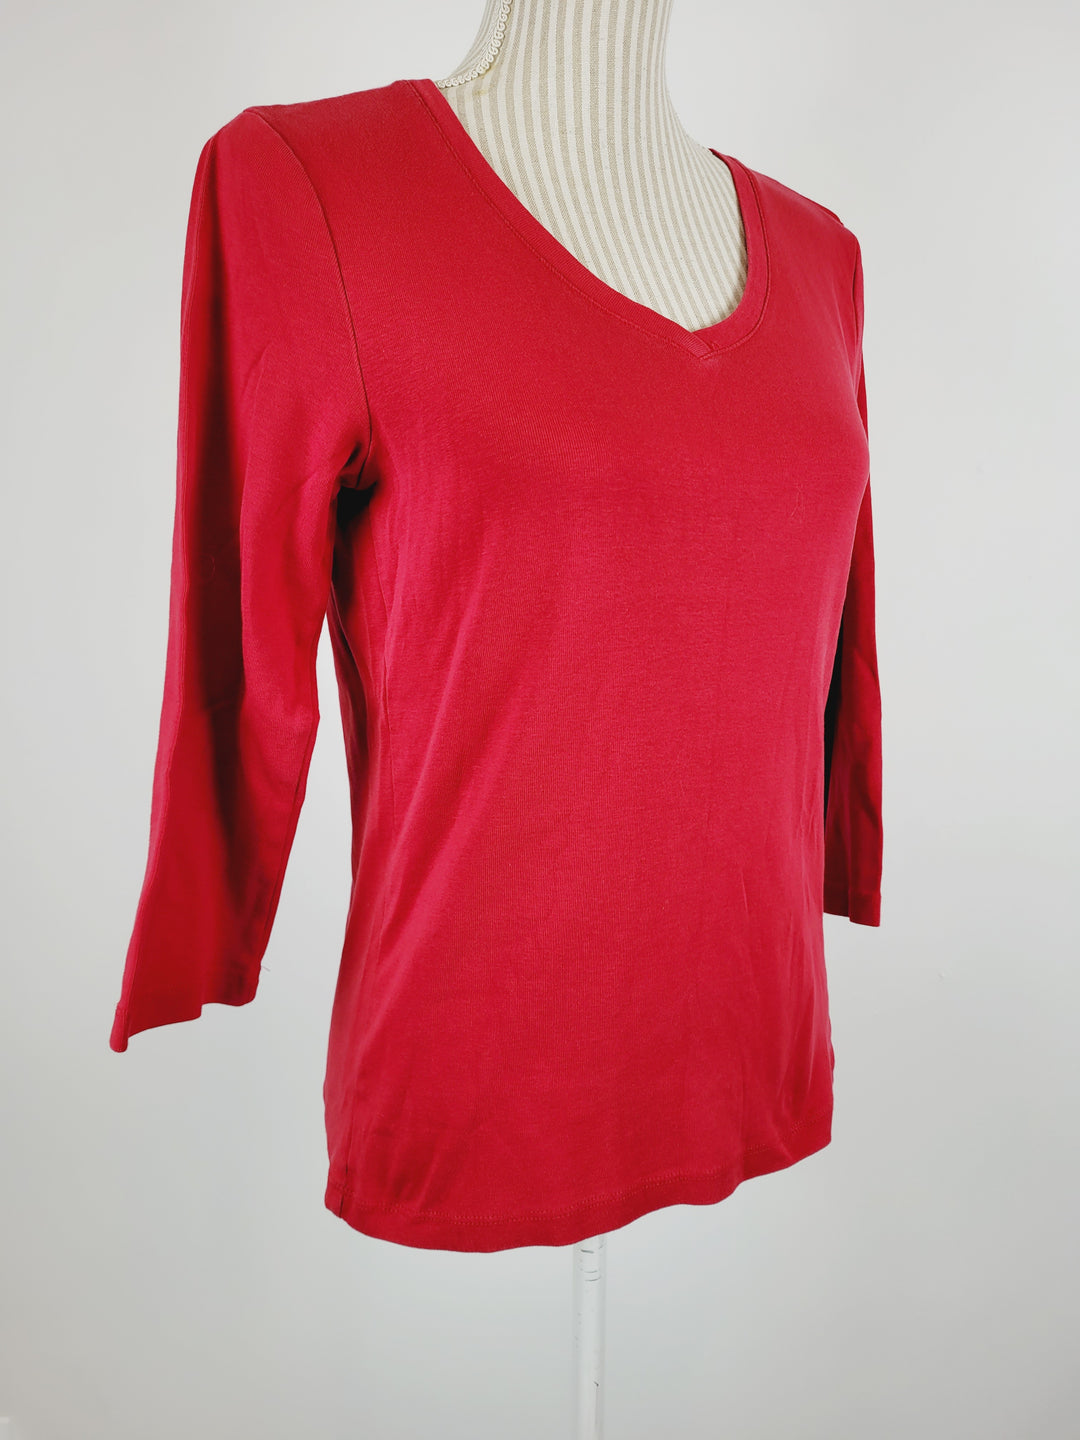 REFLECTIONS RED LONG SLEEVE TOP LADIES SMALL EUC